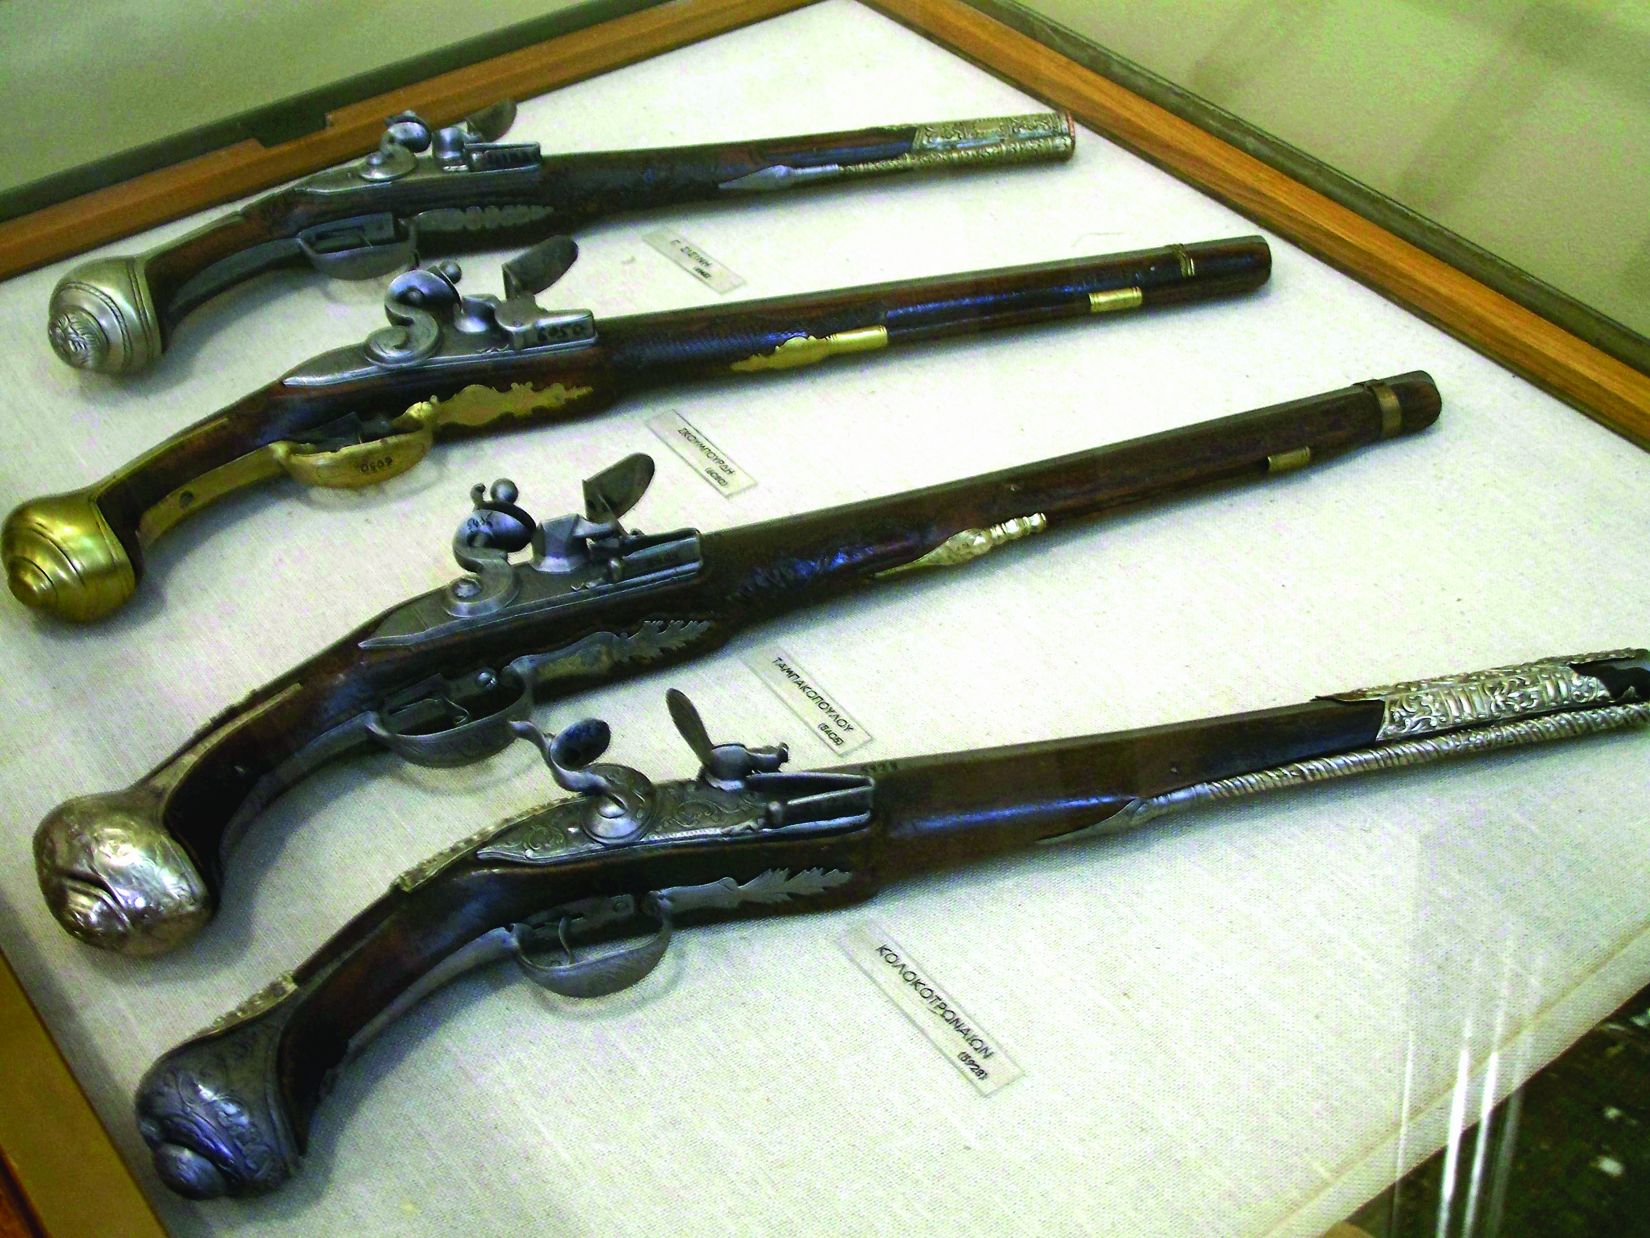 A collection of long-barreled pistols used during the Greek revolution.